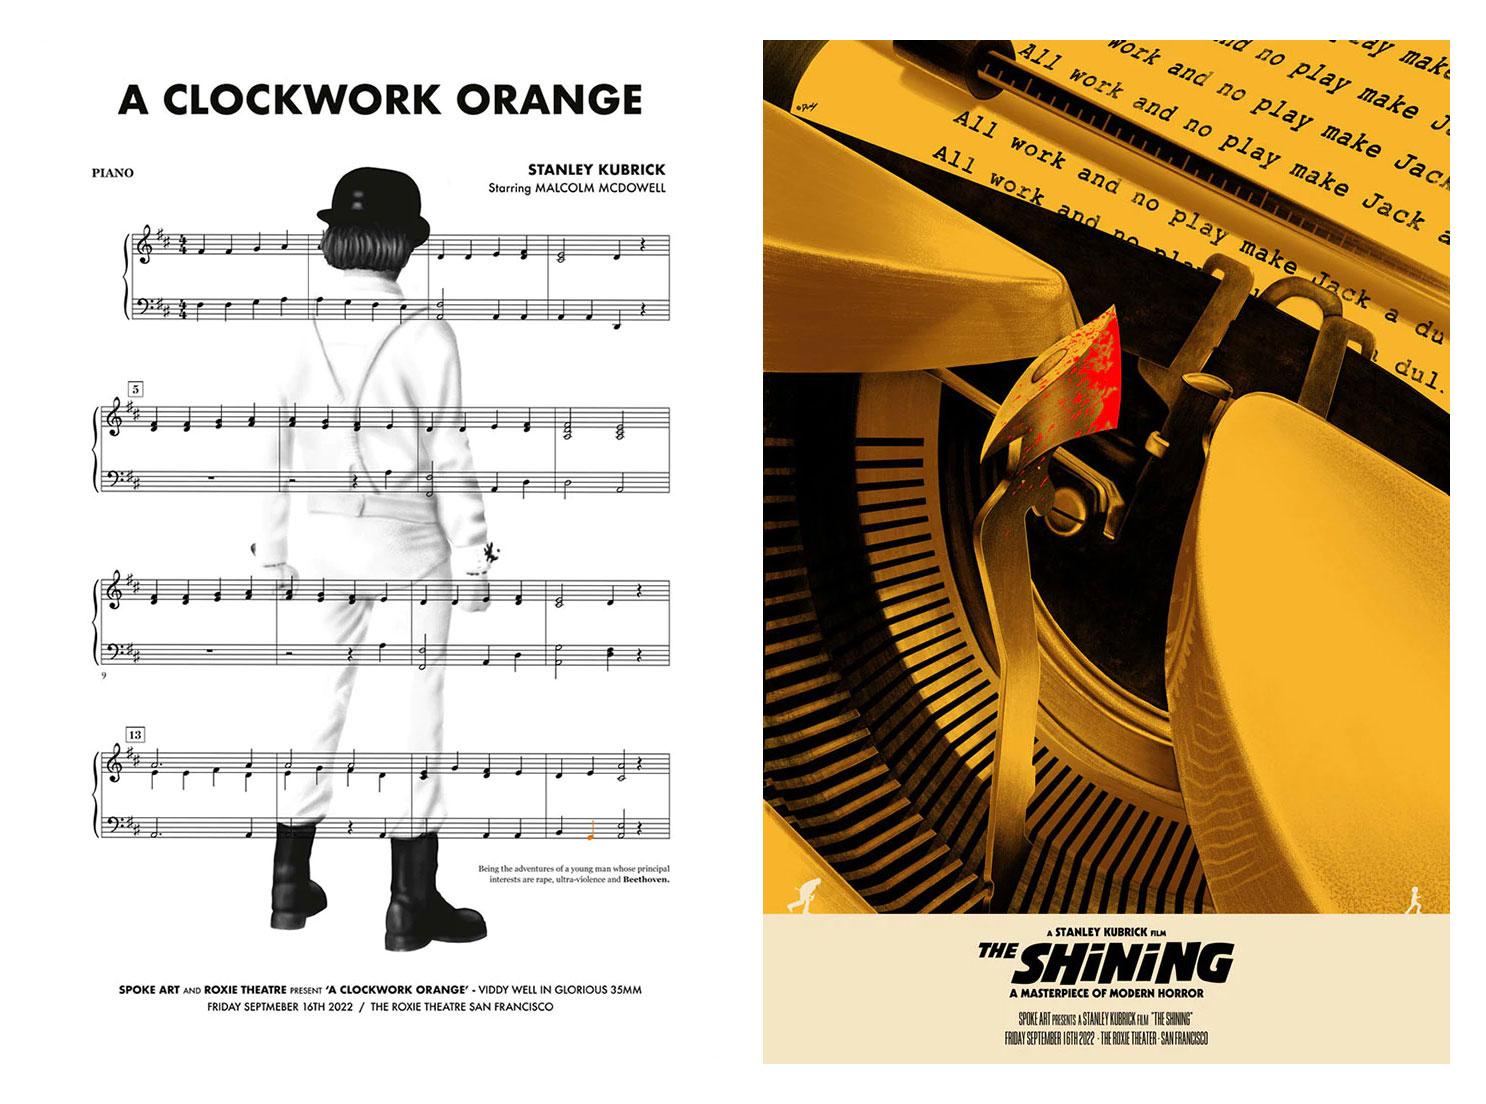 The Shining by Doaly & A Clockwork Orange by James Hobson